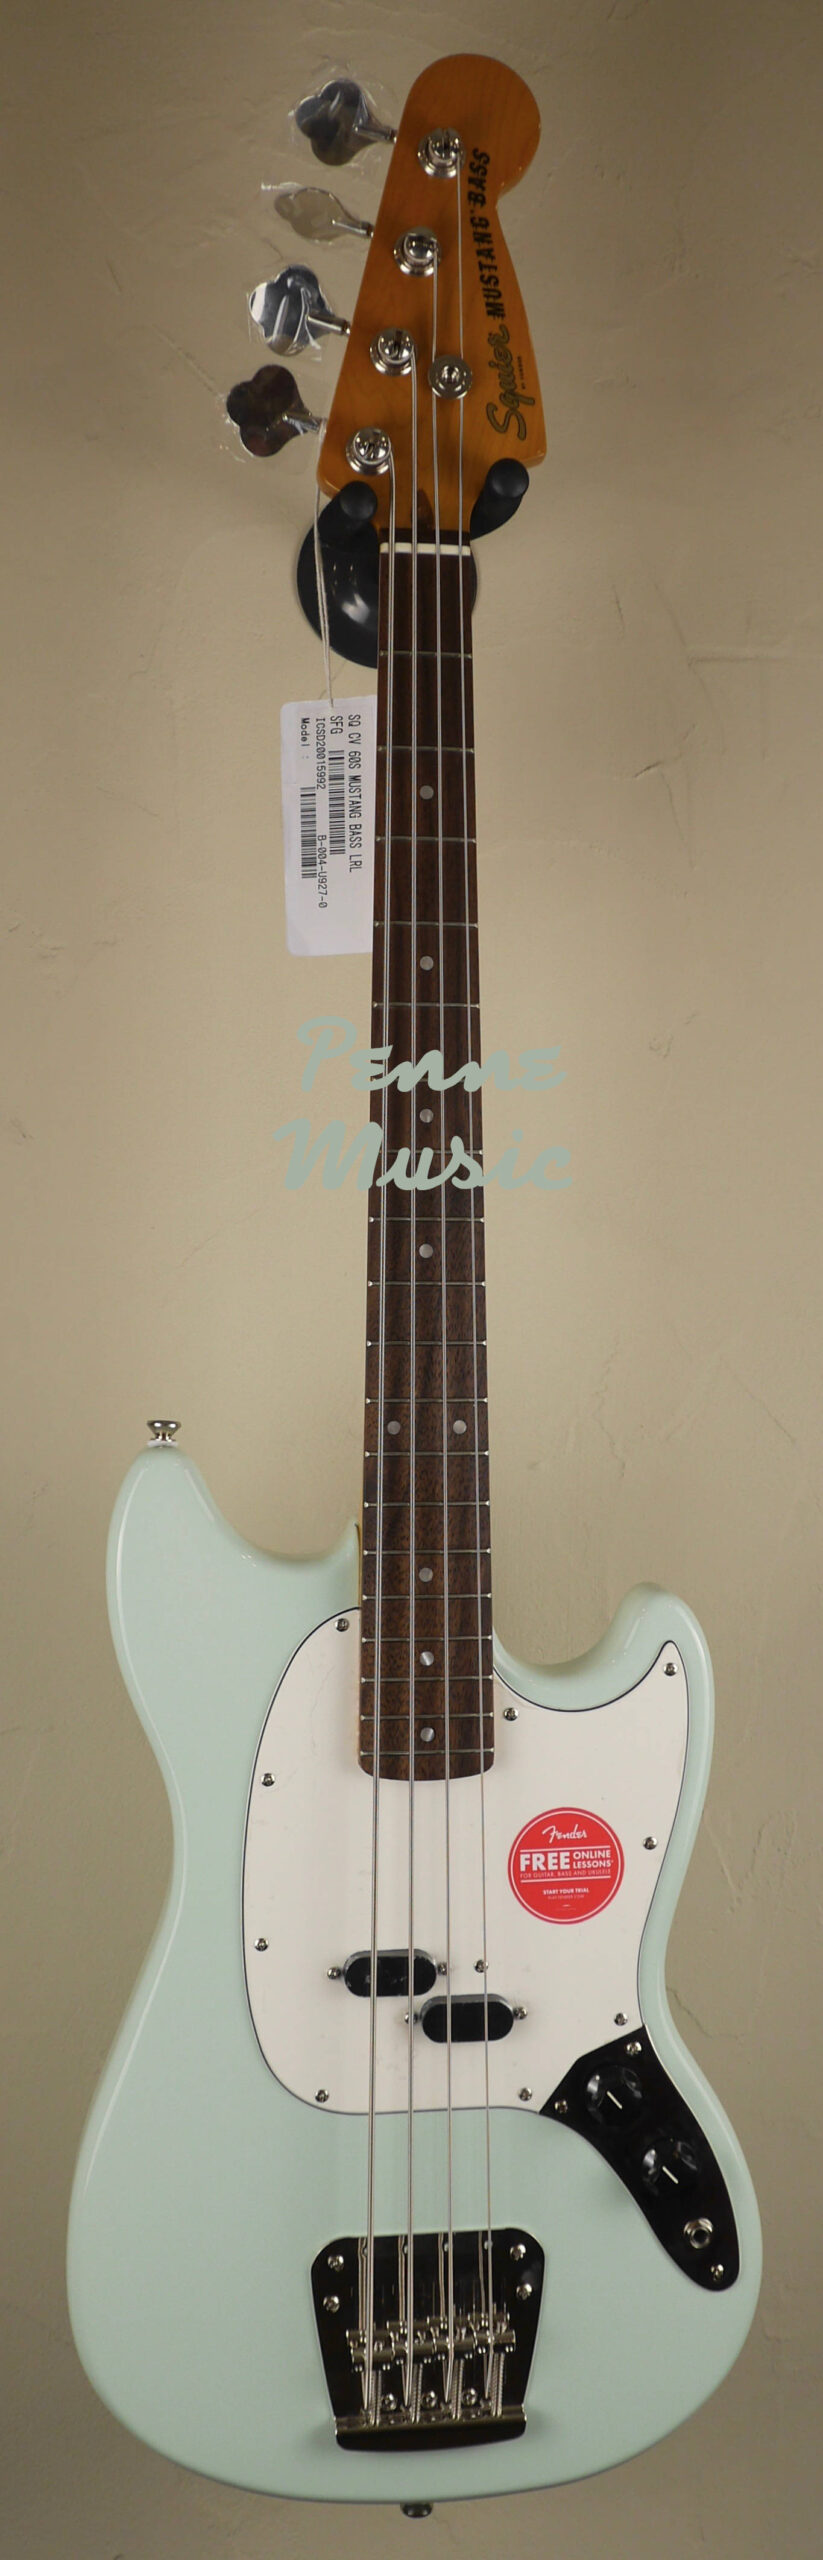 Squier by Fender Classic Vibe 60 Mustang Bass Surf Green 1